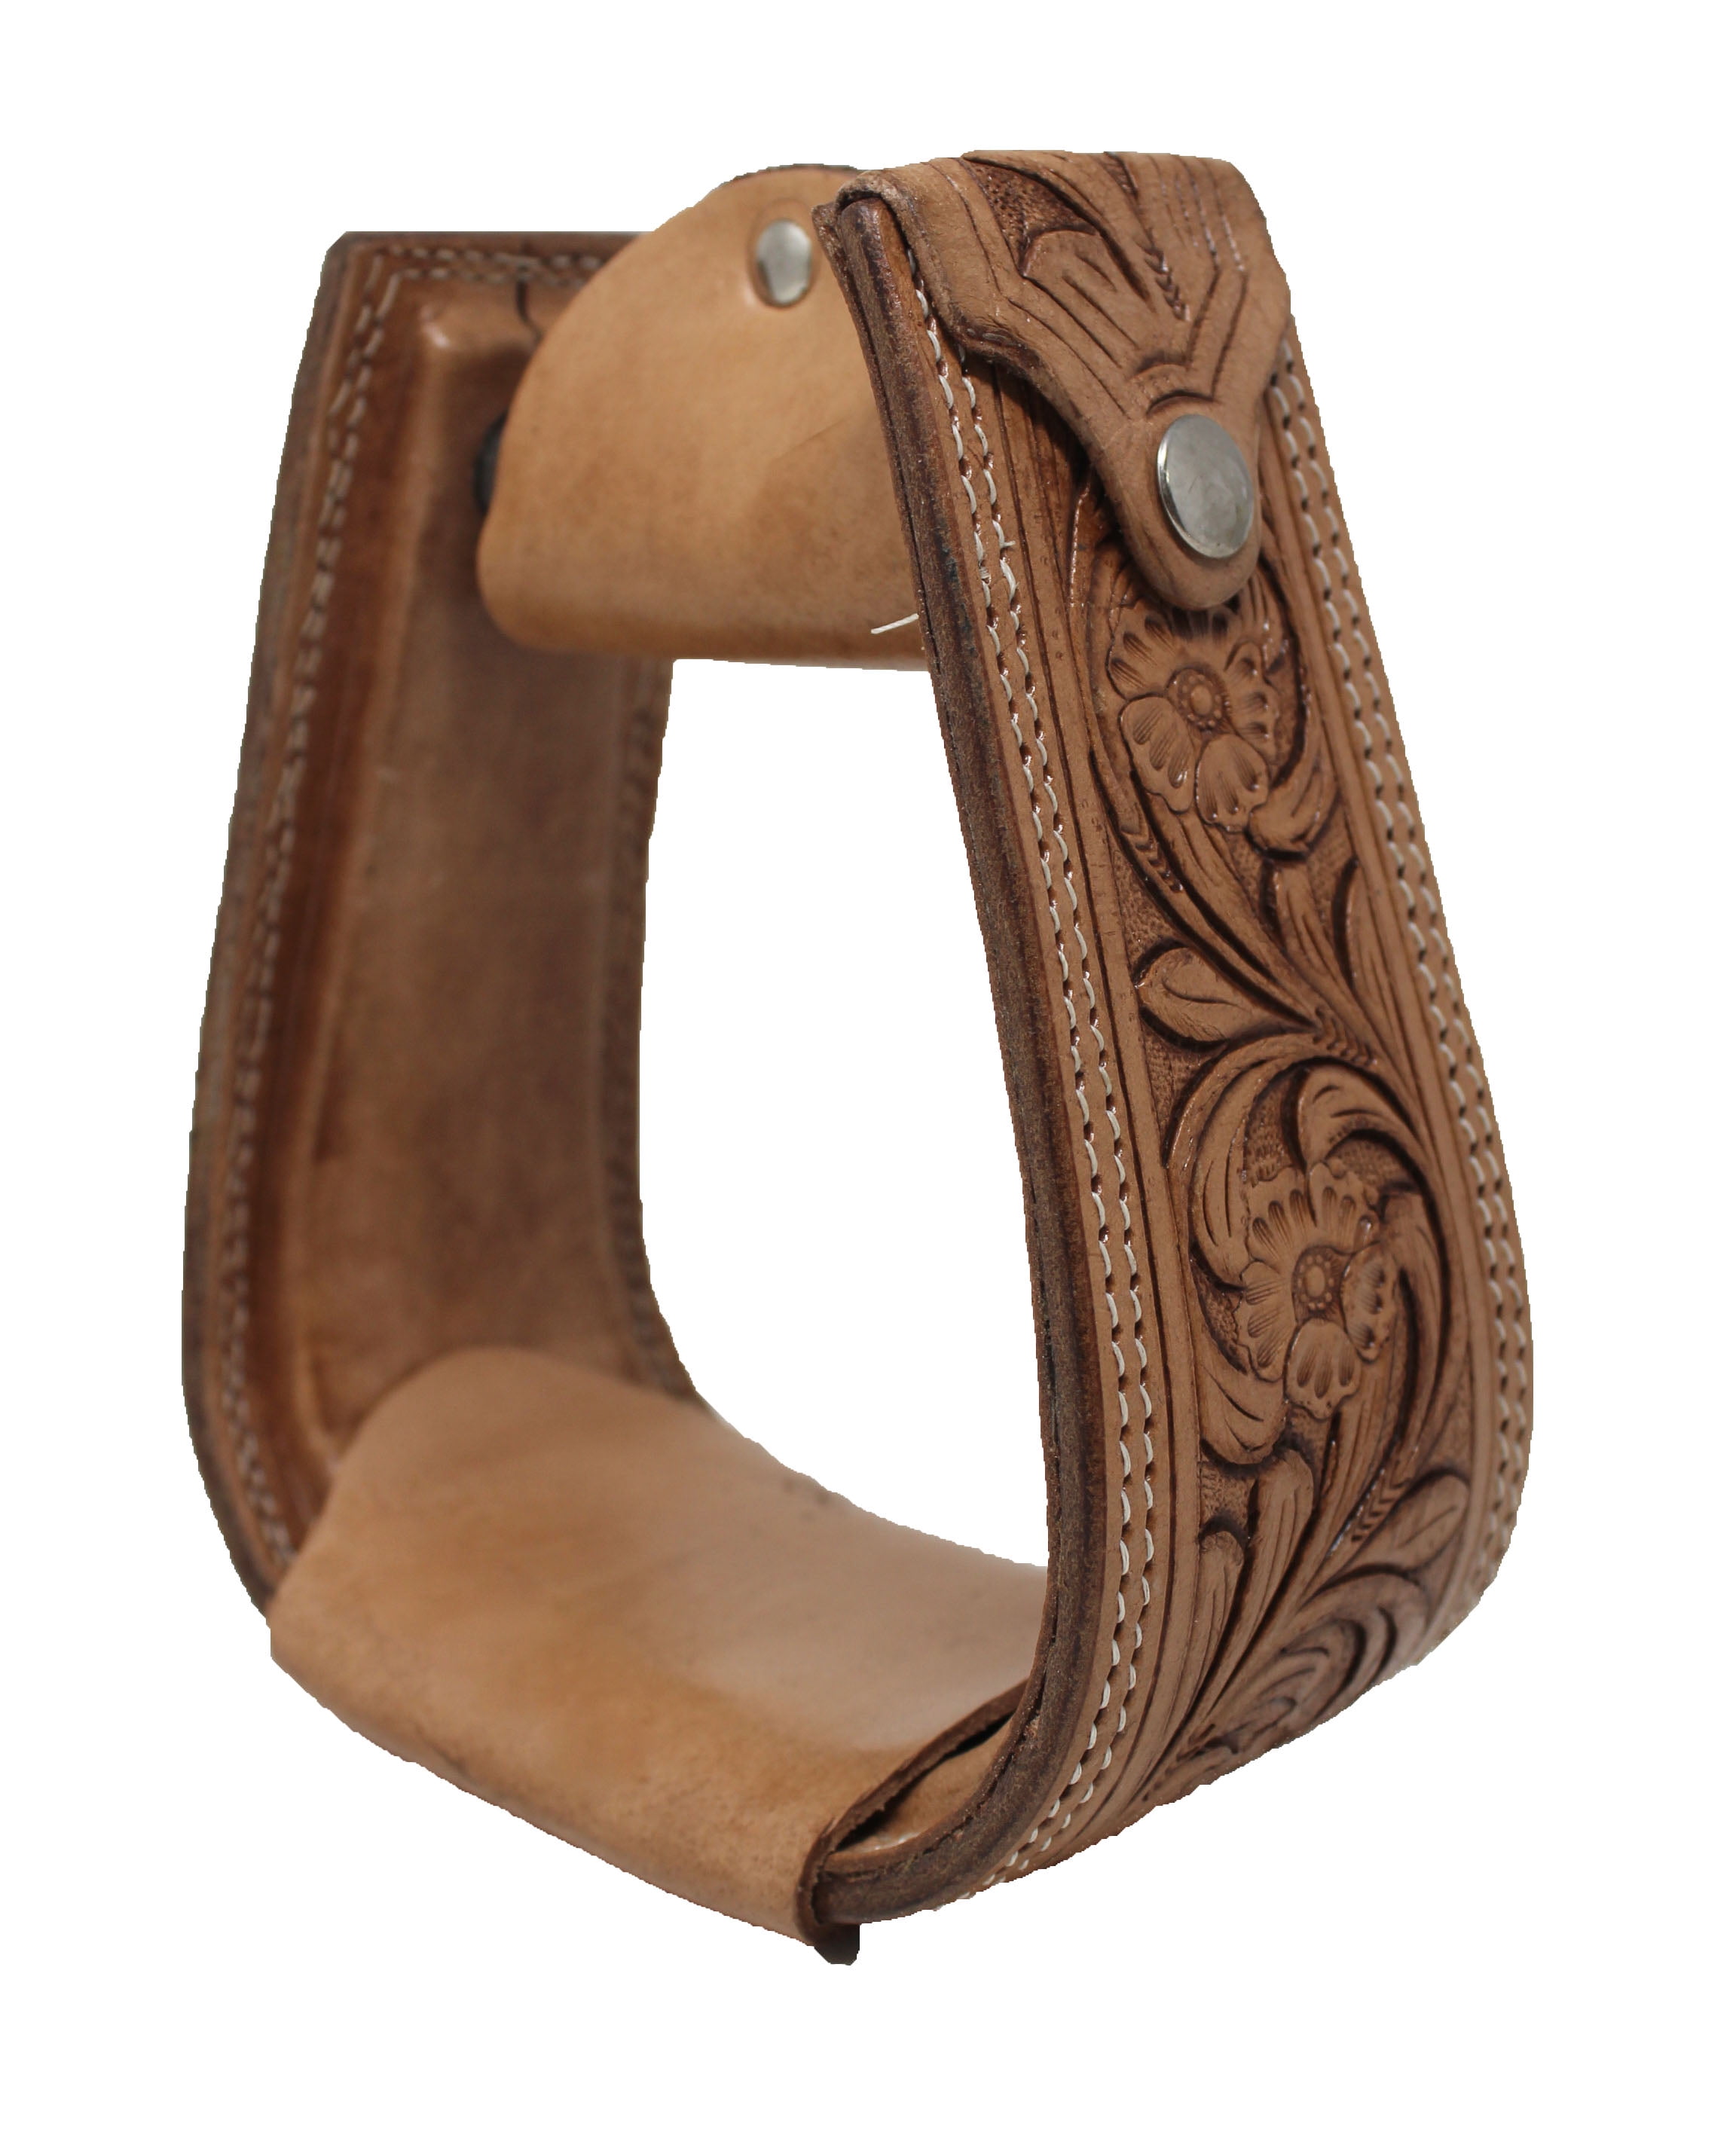 CHALLENGER Horse Western Saddle Tack Floral Hand Tooled Leather Covered Stirrups 51173TN